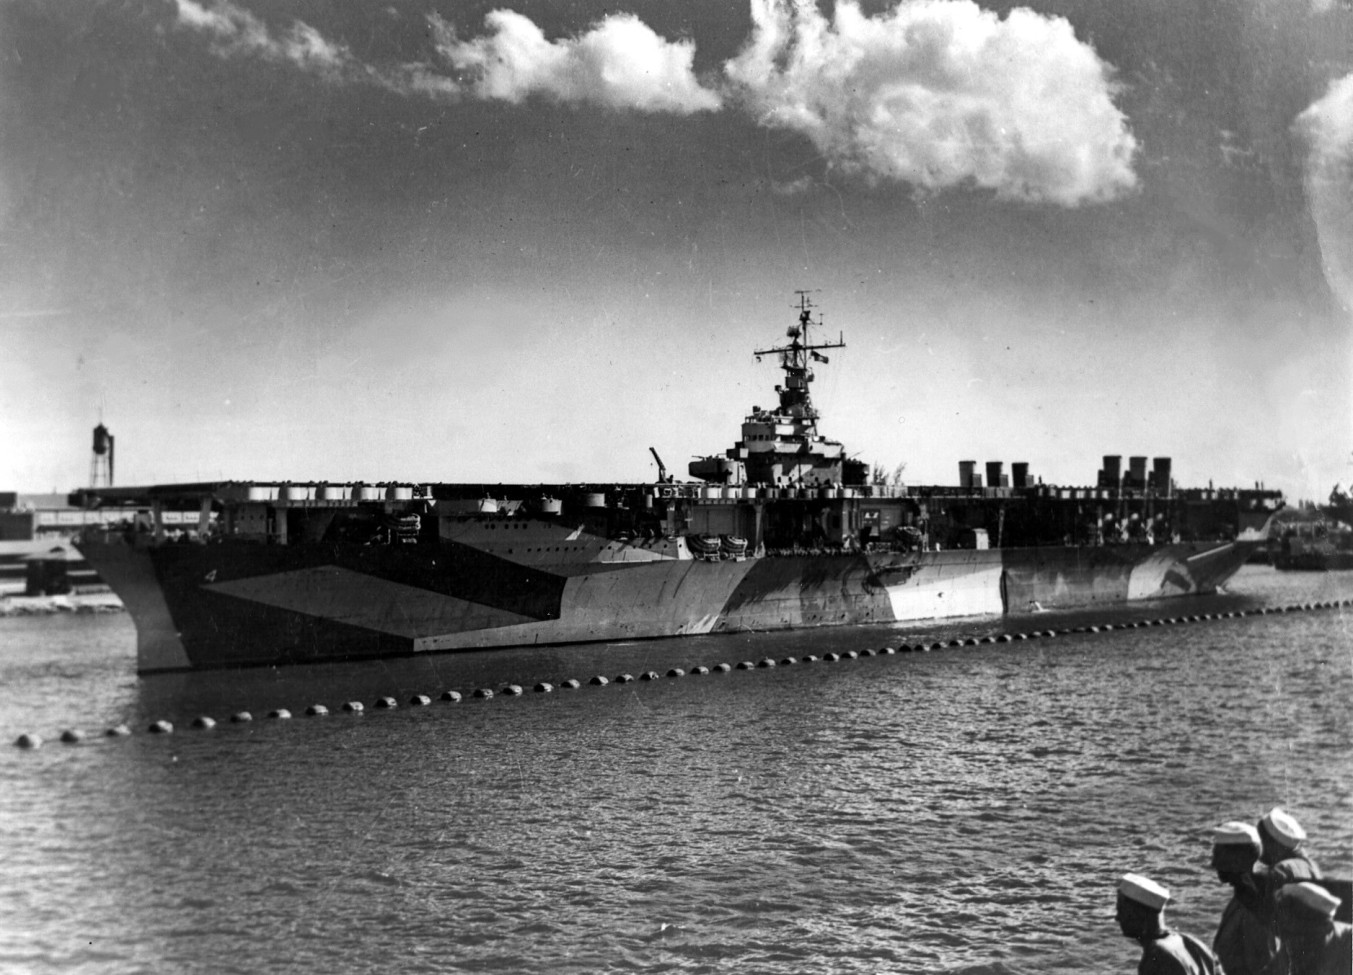 USS Ranger (CV-4), named for the famous sloop that had been the first ship flying the American flag to be saluted back in 1778, CV-4 was the first built from the keel up as a carrier. In a real sense, Coolidge made this essential component of America's navy possible when he approved the Cruiser Act. Laid down on 26 September 1931 in Newport News, Virginia, Ranger would be launched two years later and commissioned in 1934. She was returning from patrols in the Caribbean when the Japanese attacked Pearl Harbor. The largest carrier in the Atlantic Fleet at that time, she led the amphibious assault on French Morocco in 1942, launching 496 sorties over three days, forcing the enemy to capitulate before Allied pressure. Returning to home coasts, she patrolled the Atlantic seaboard until joined to the British Home Fleet, protecting the approaches to those islands. Taking the offensive to Germany's back door, she waged war in Norwegian waters, successfully targeting convoys, tankers, merchant ships and transports. Winding down her wartime service, Ranger carried planes to Casablanca then personnel to the Pacific and finally brought essential training to both air and sea units operating out of the west coast. Working her way back to the east coast, she retired from the service over a year after the end of the war, October 1946. 